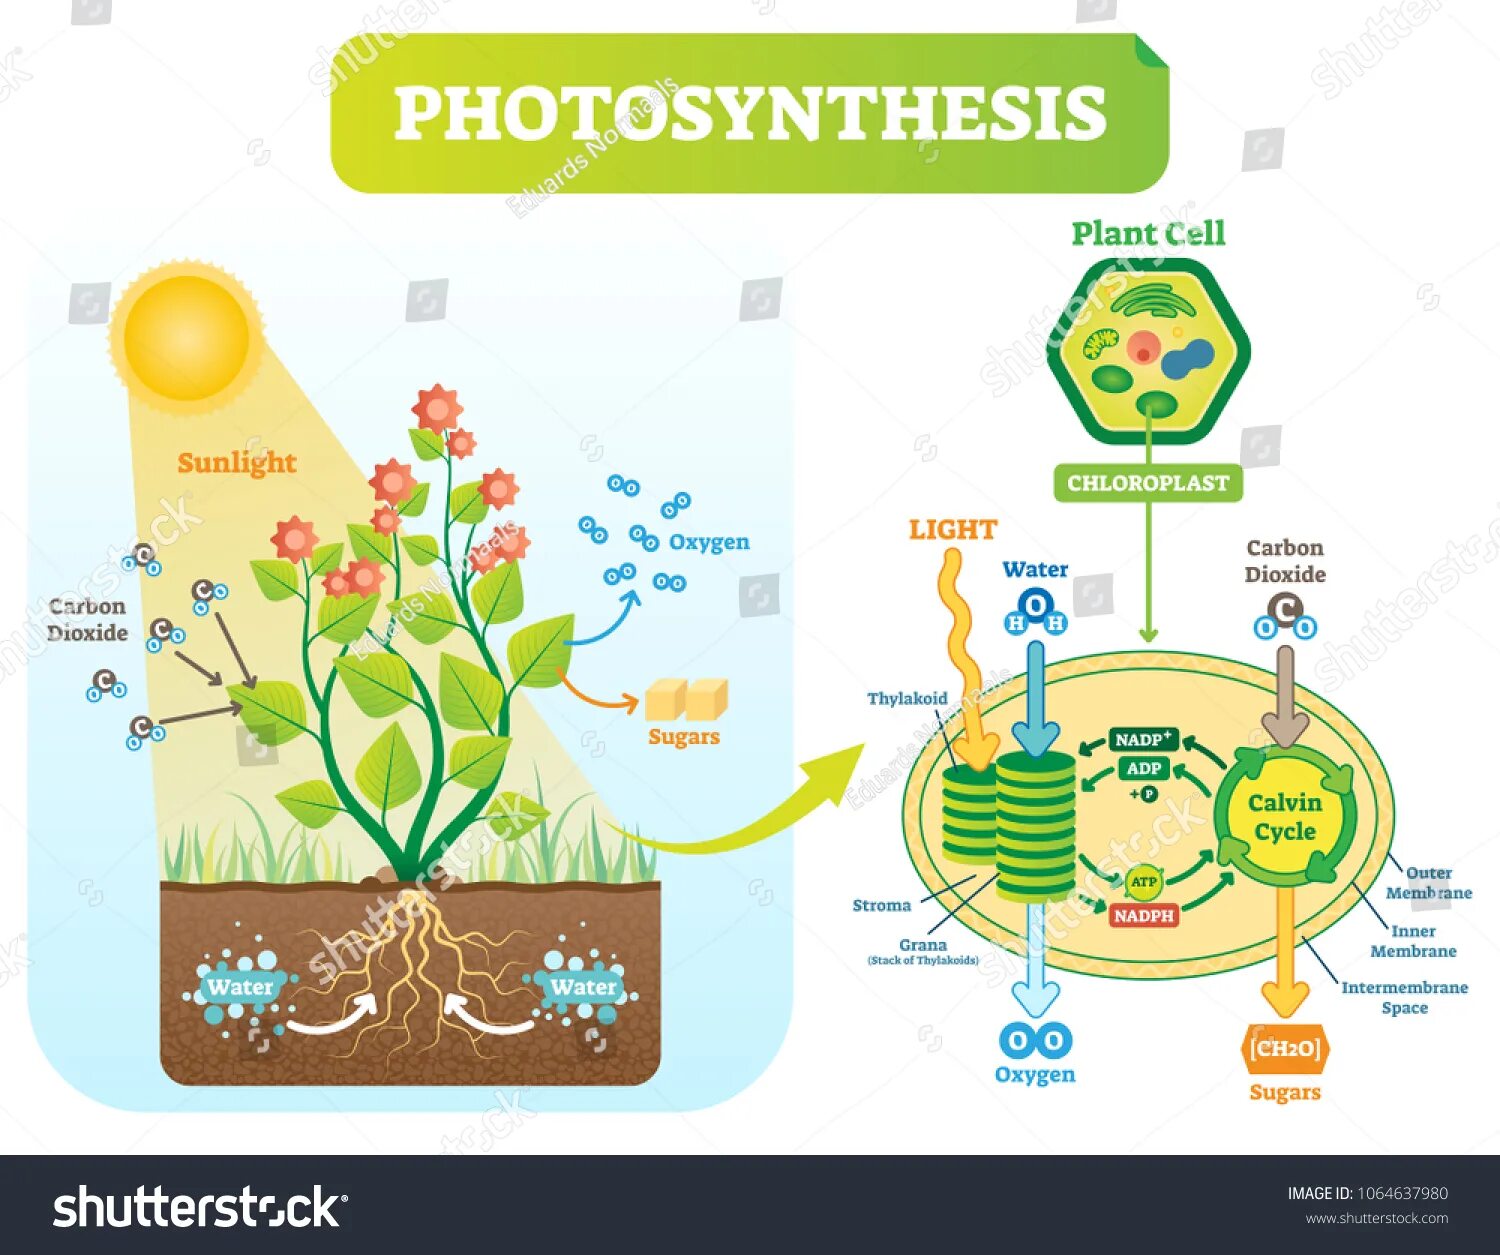 Major coloring photosynthesis